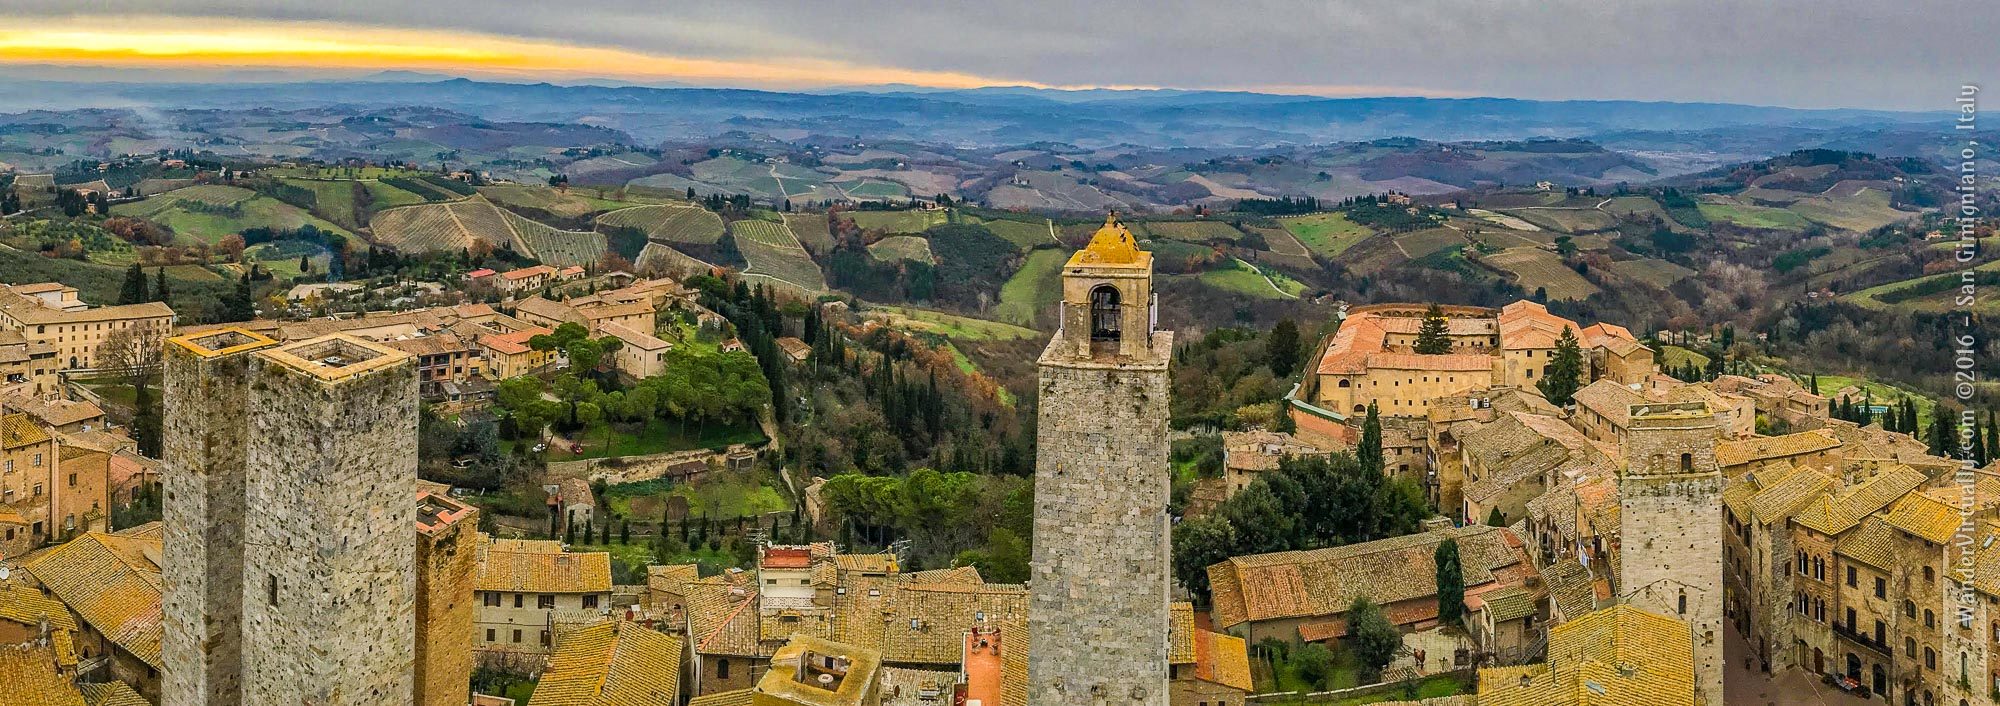 A view of the Tuscan landscape, from the Torre Grossa in San Gimignano, Italy.